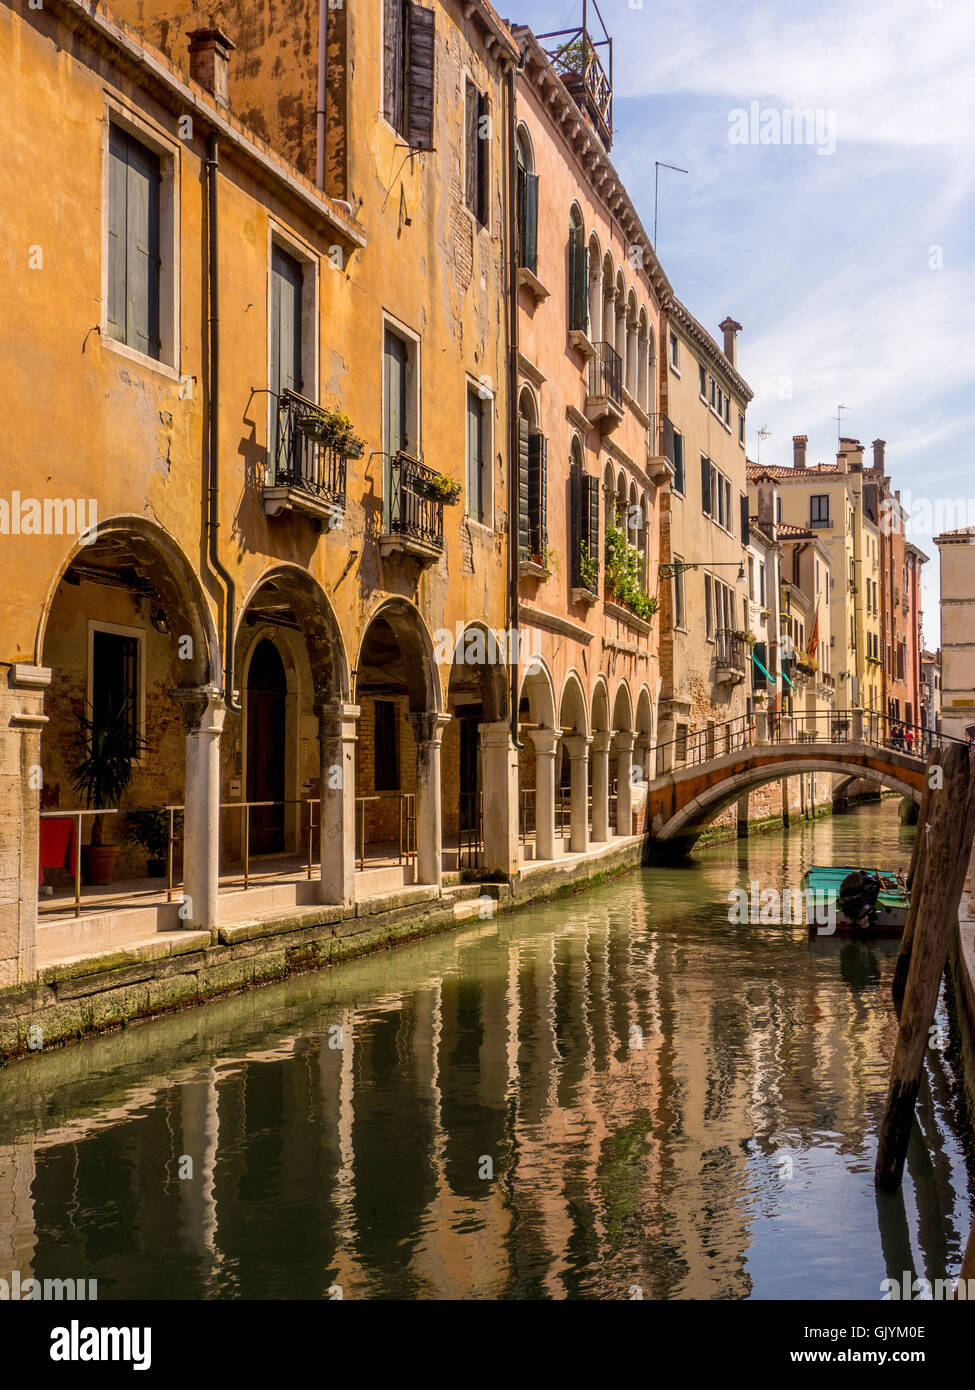 Narrow canal or rio with arched foot bridge alongside traditional buildings. Venice, Italy. Stock Photo